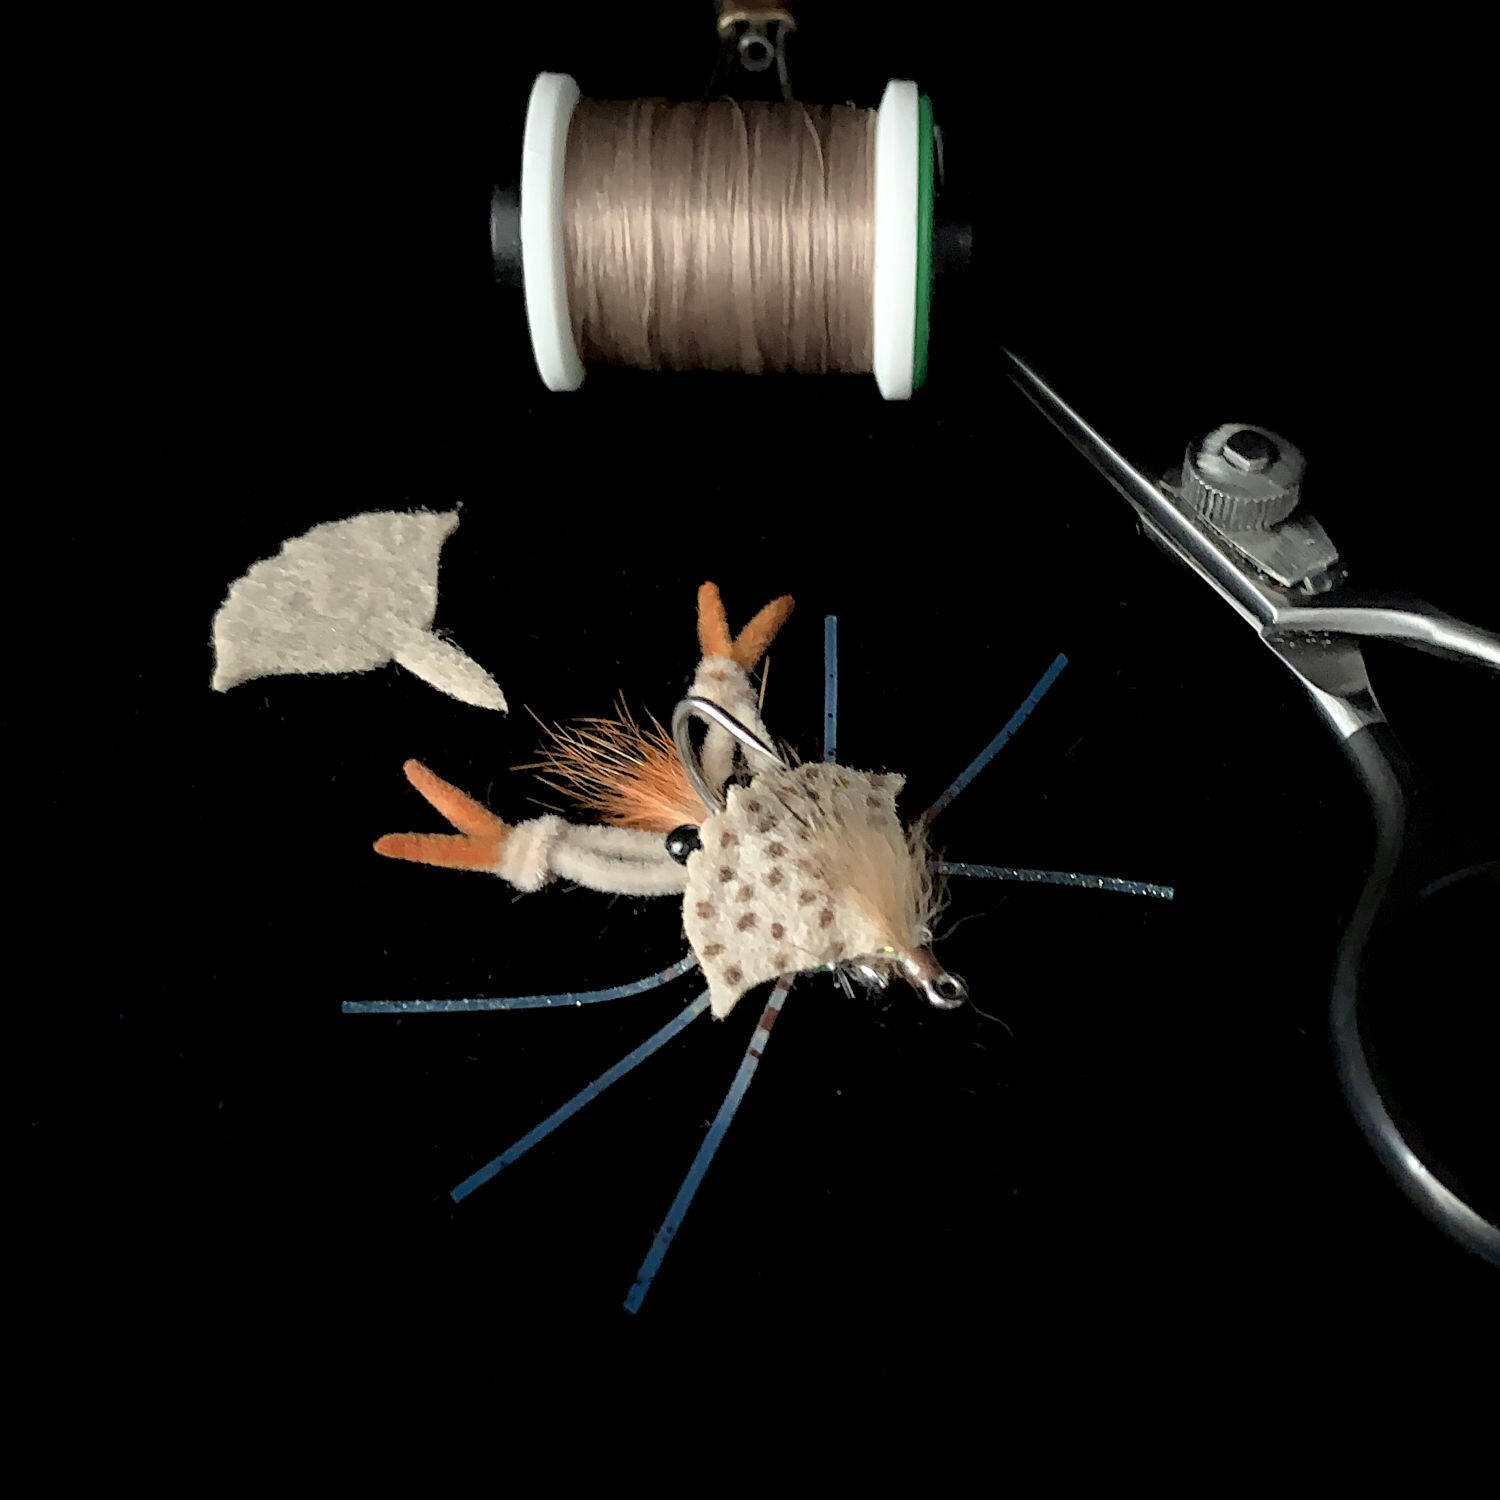 Sight Cast Fishing Company — How To: Tying the Straight Shooter Crab Fly